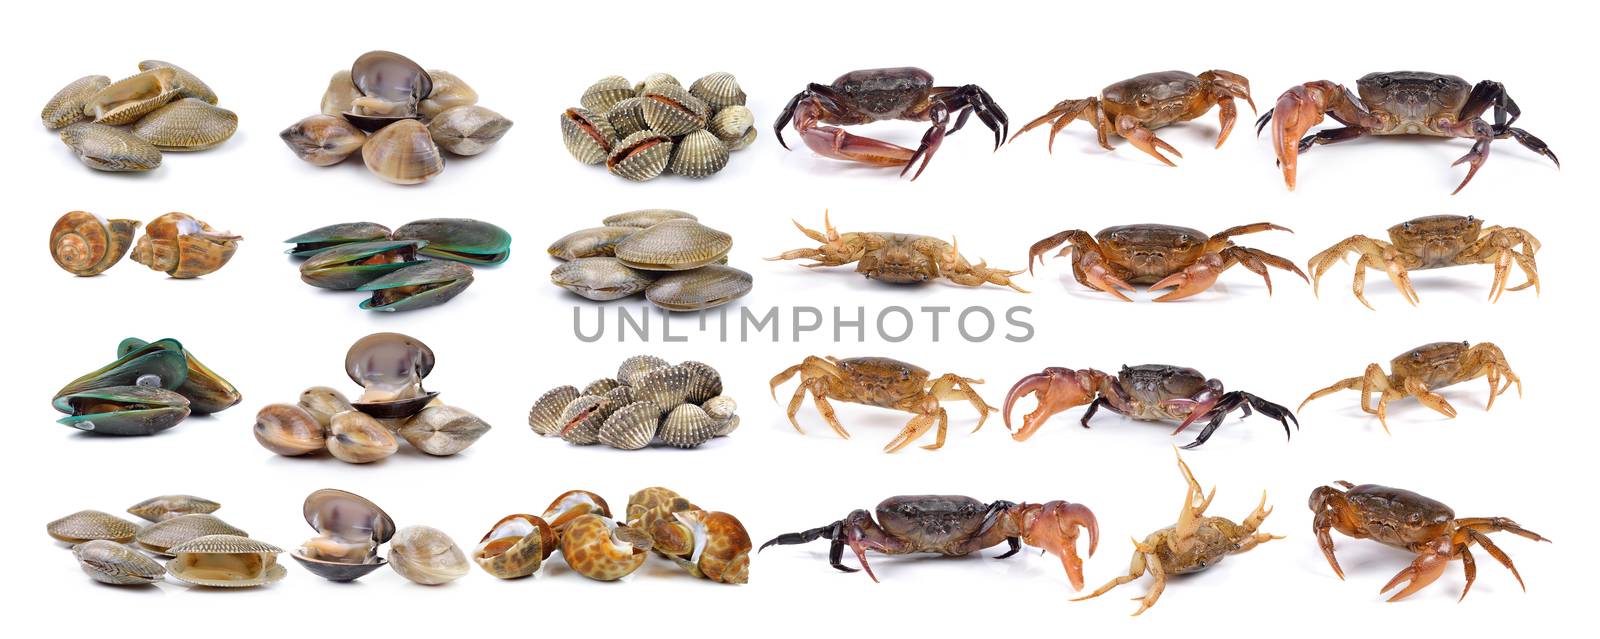  crab and enamel venus shell, Clam shellfish, Surf clam, mussel,  spotted babylon on white background